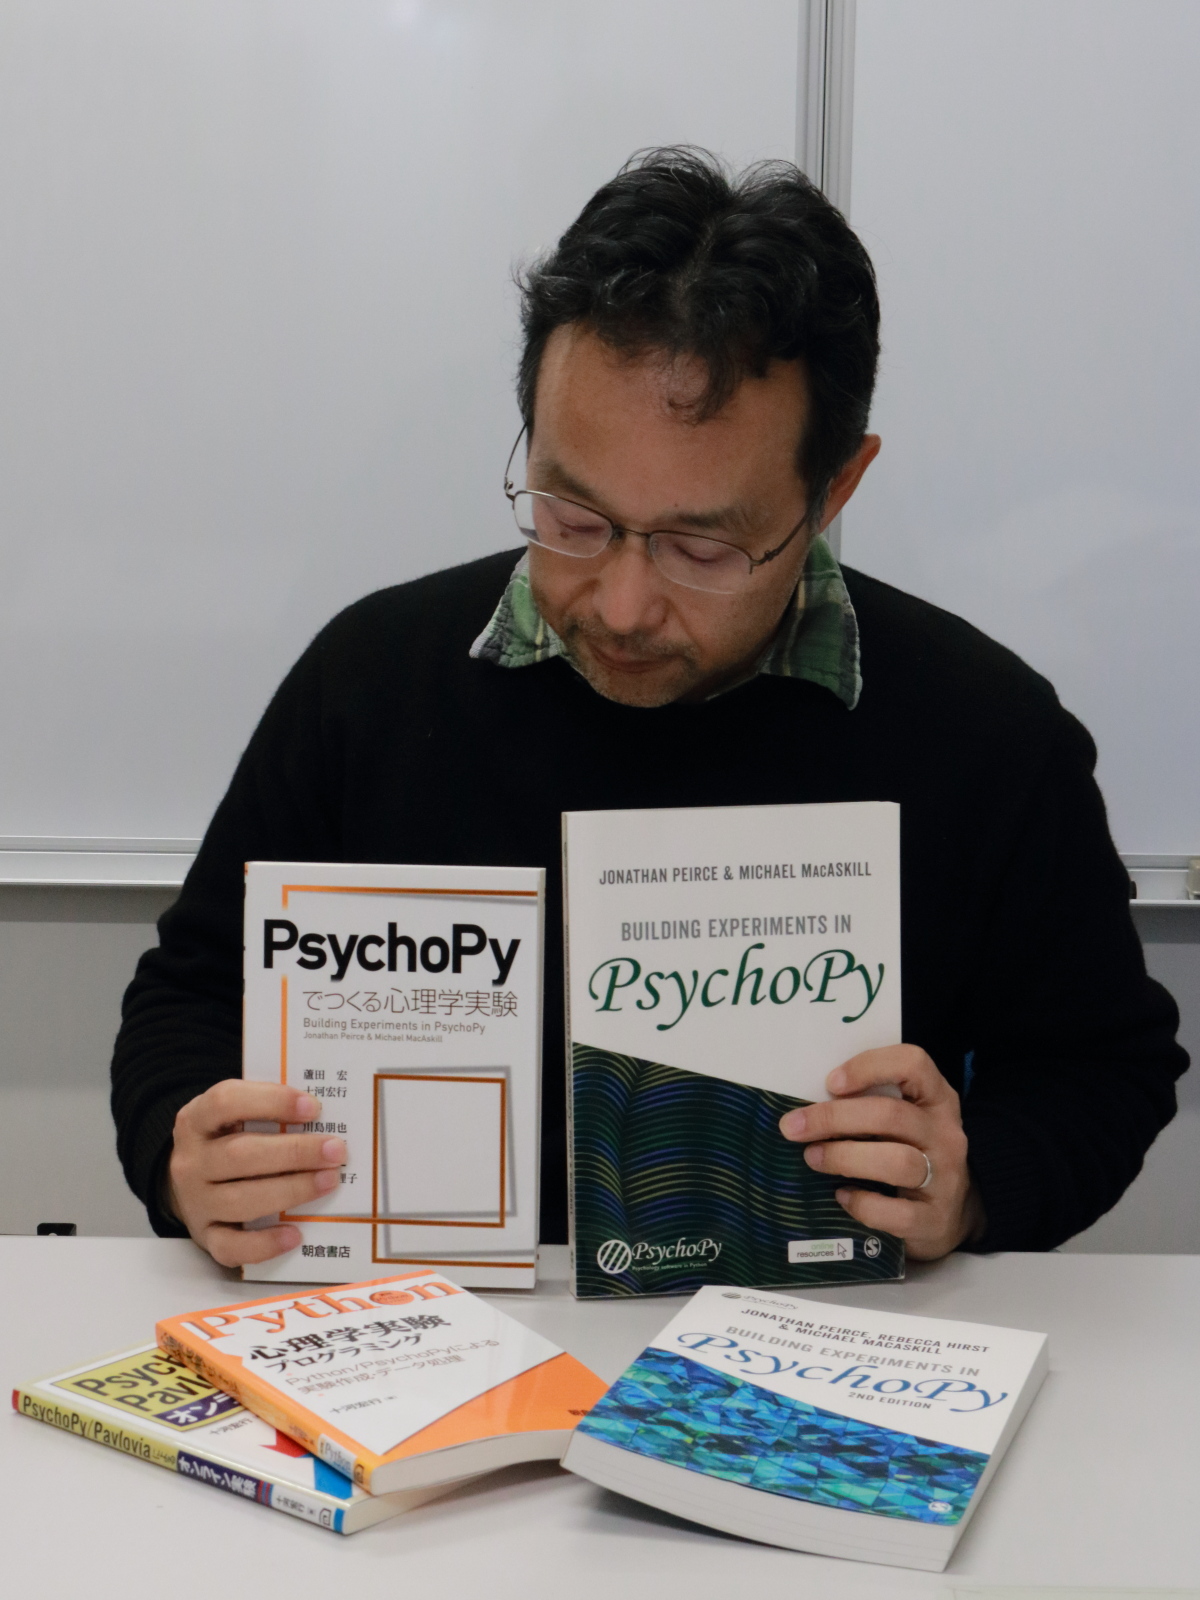 Hiroyuki with the translated version of the book, Building Experiments in PsychoPy.